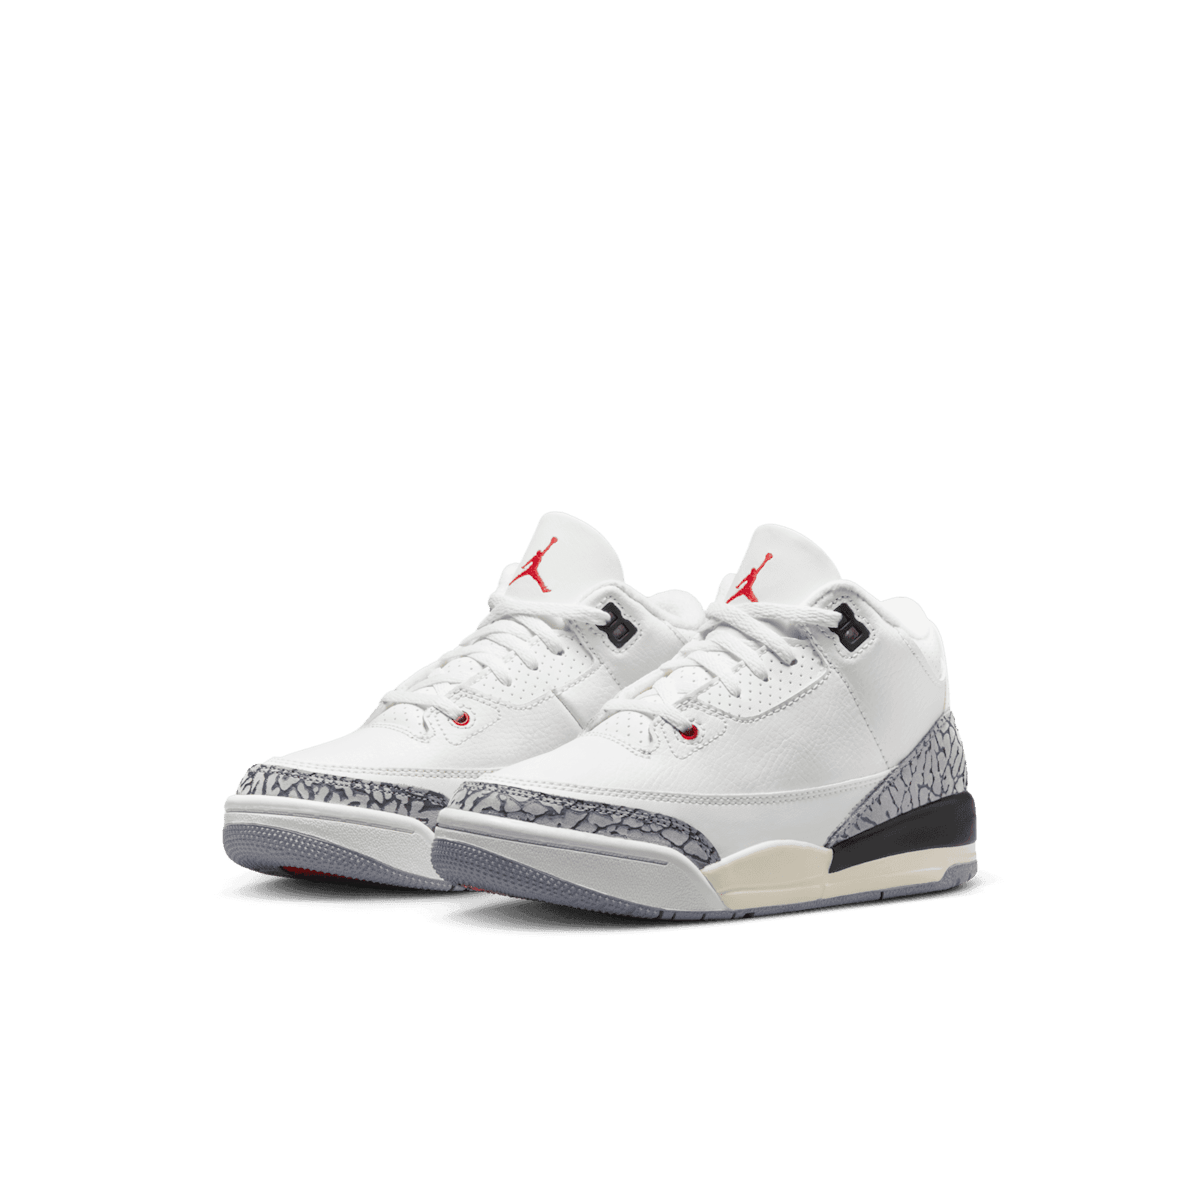 Air Jordan 3 Reimagined White Cement (PS) Angle 2